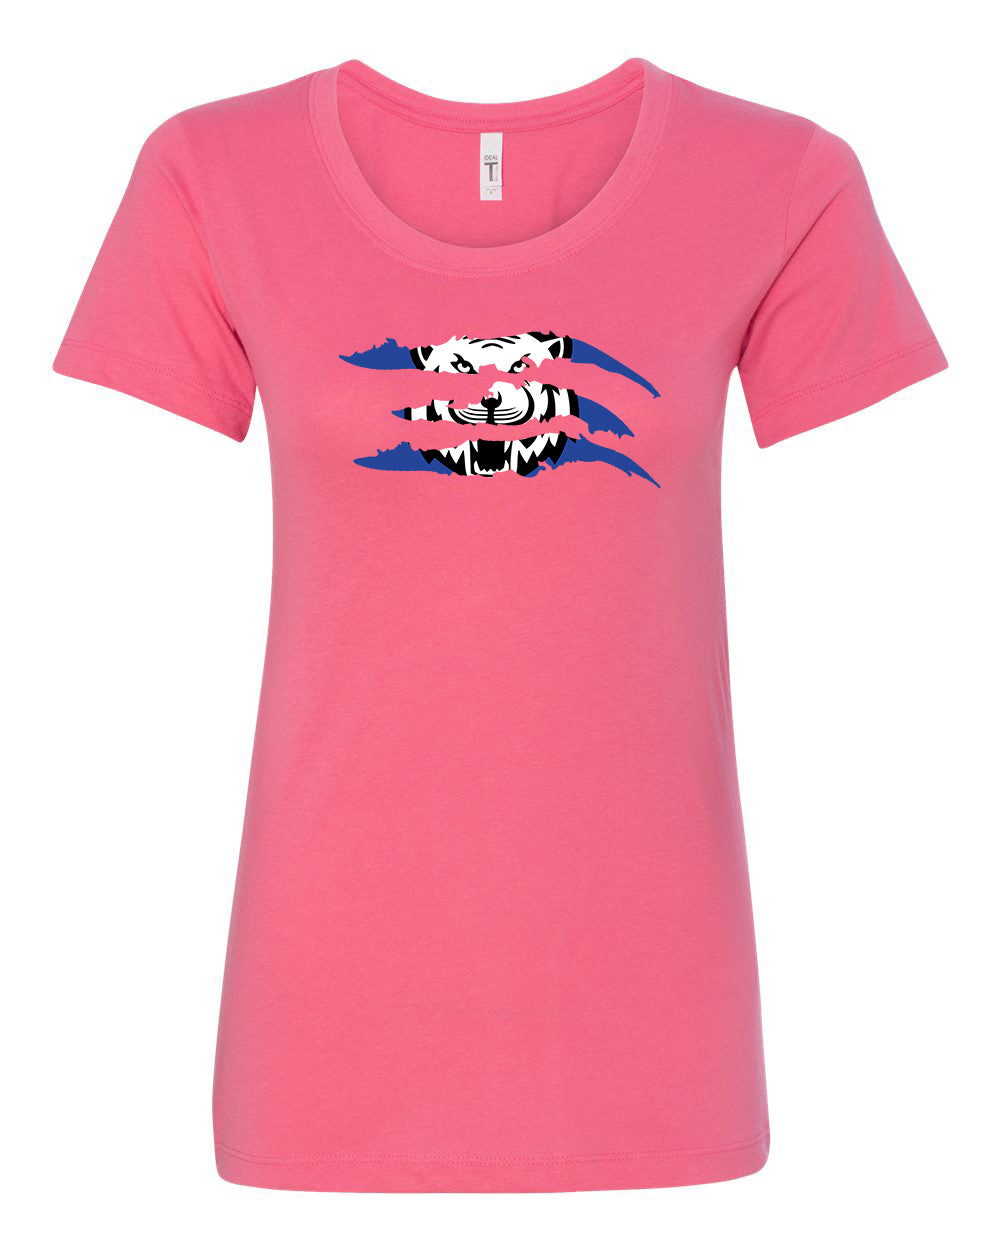 Suffield Soccer Club Ladies T-shirt "Scratch" - 1510 (color options available)